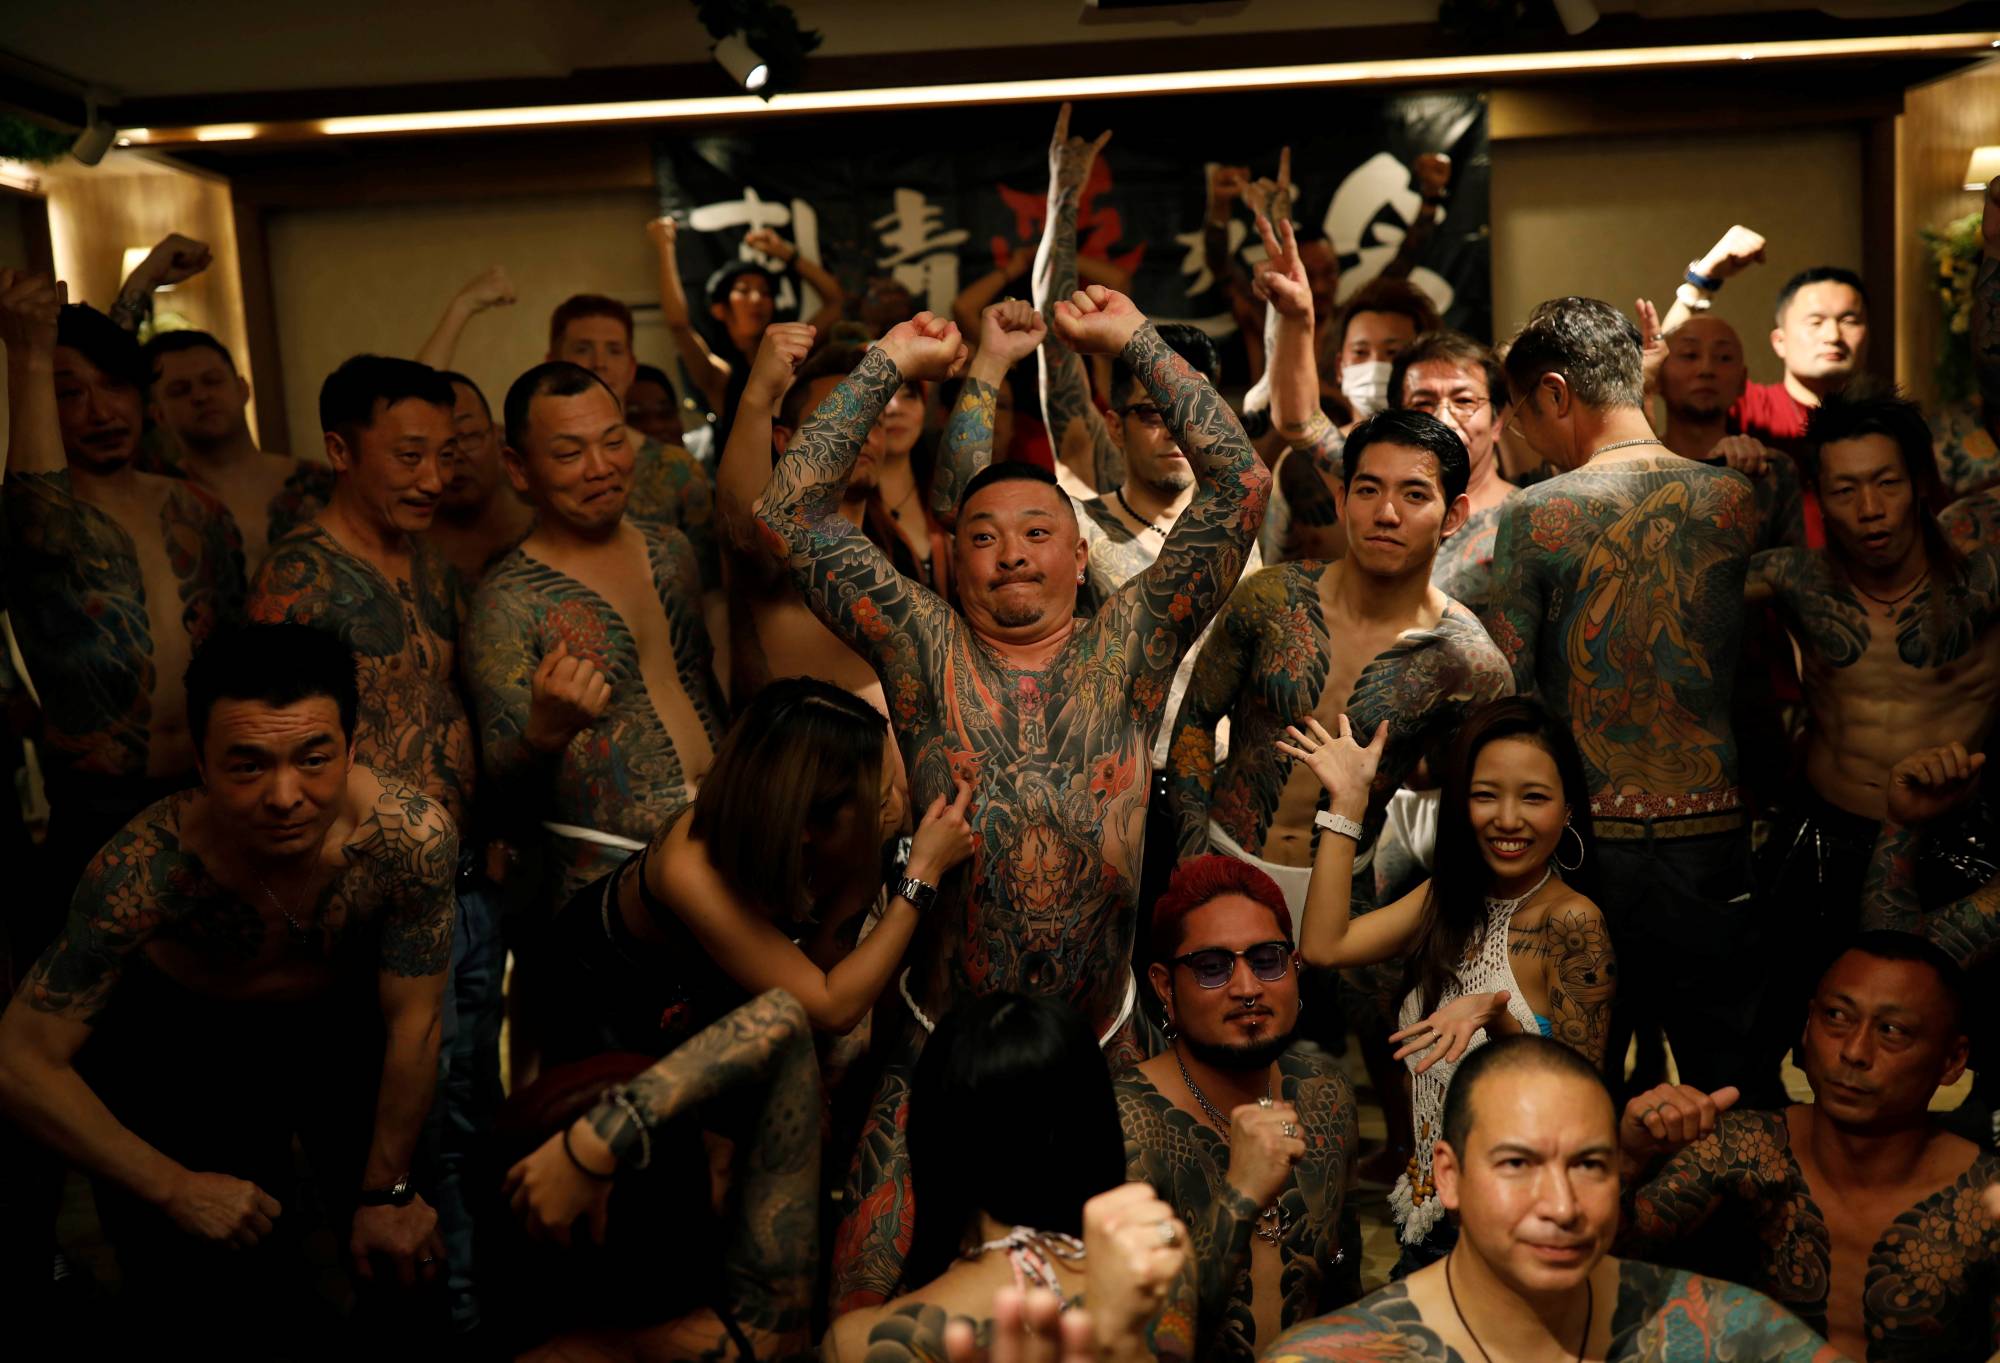 People with tattoos gather together for group photos at the annual gathering of the Irezumi Aikokai (Tattoo Lovers Association) in Tokyo in February. | REUTERS